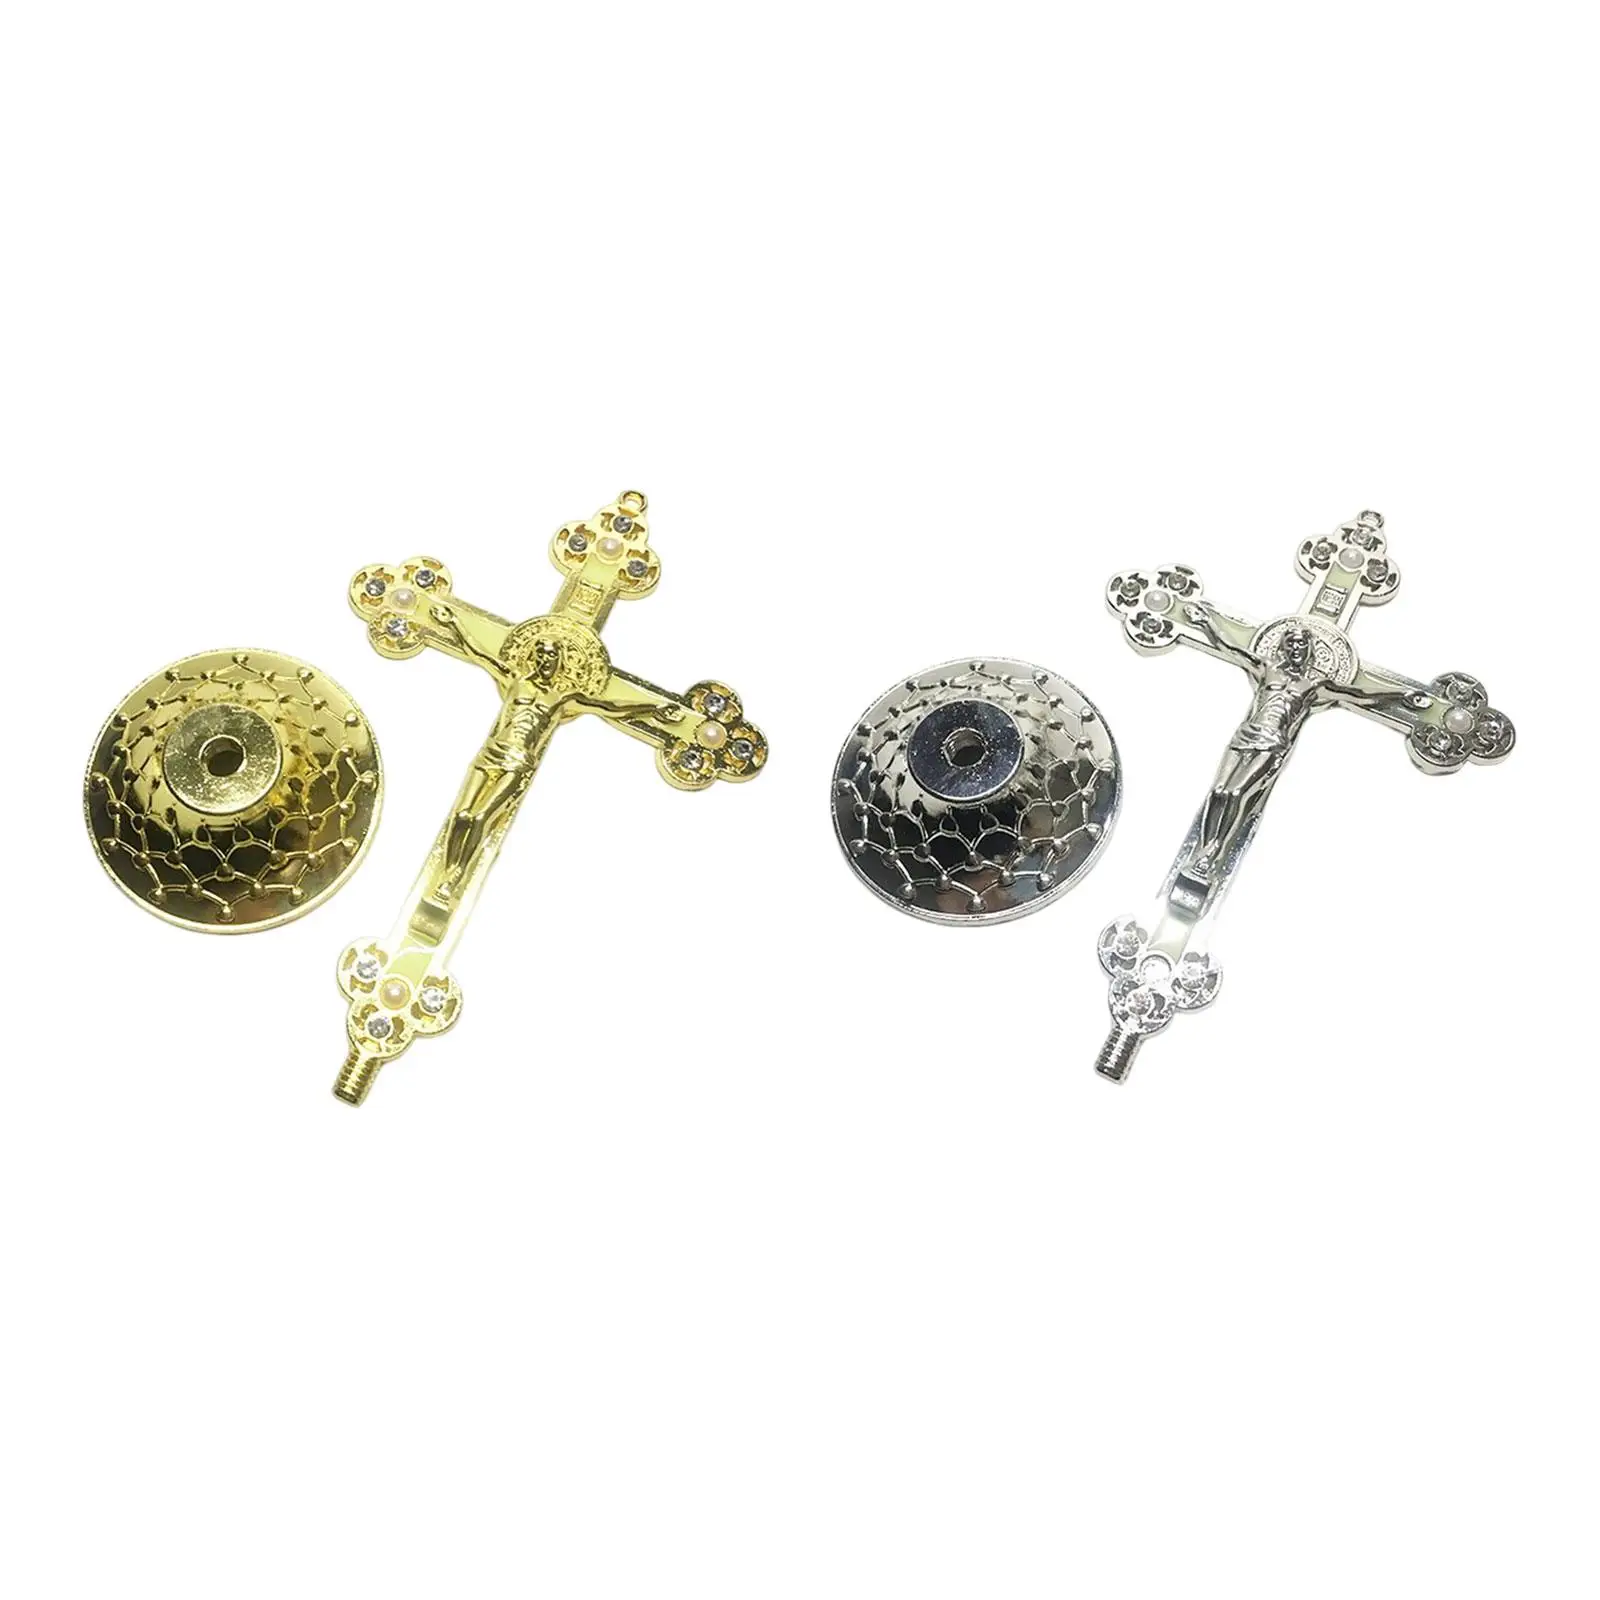 Wall Cross Miniature Collection Religious Ornament Sculpture Crucifix Figurine for Easter Shelf Living Room Christmas Bedroom